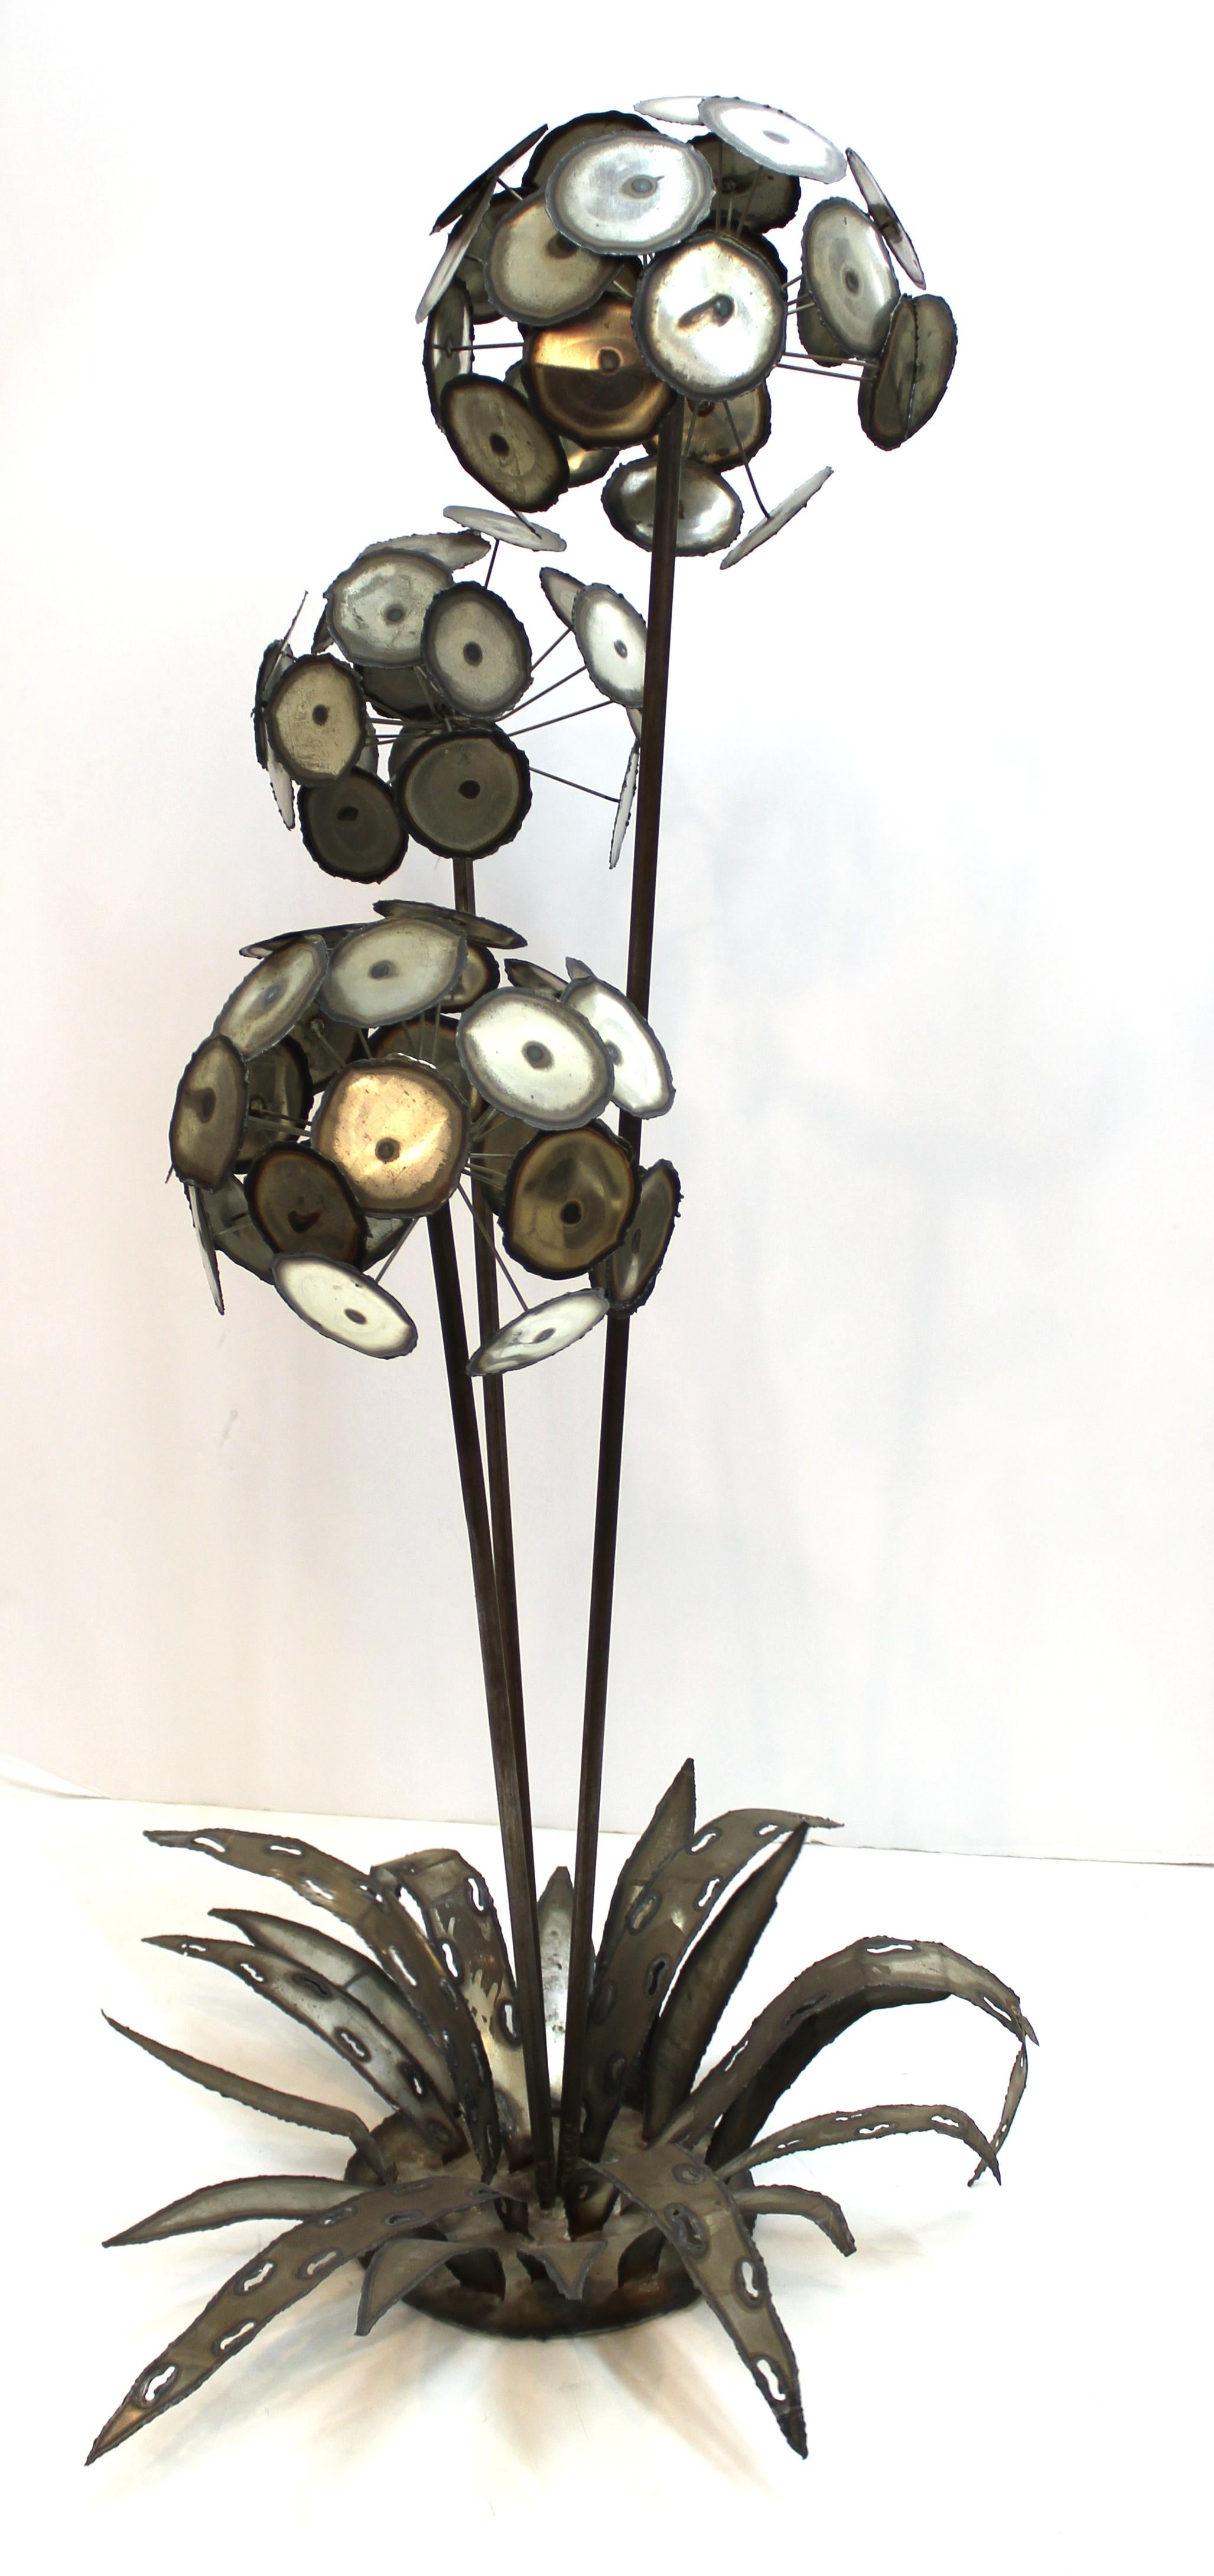 Brutalist monumental sized metal flower sculpture consisting of three flower heads on a base with leaves. One of the leaves has an illegibly signed metal tag. In good vintage condition with age-appropriate patina.